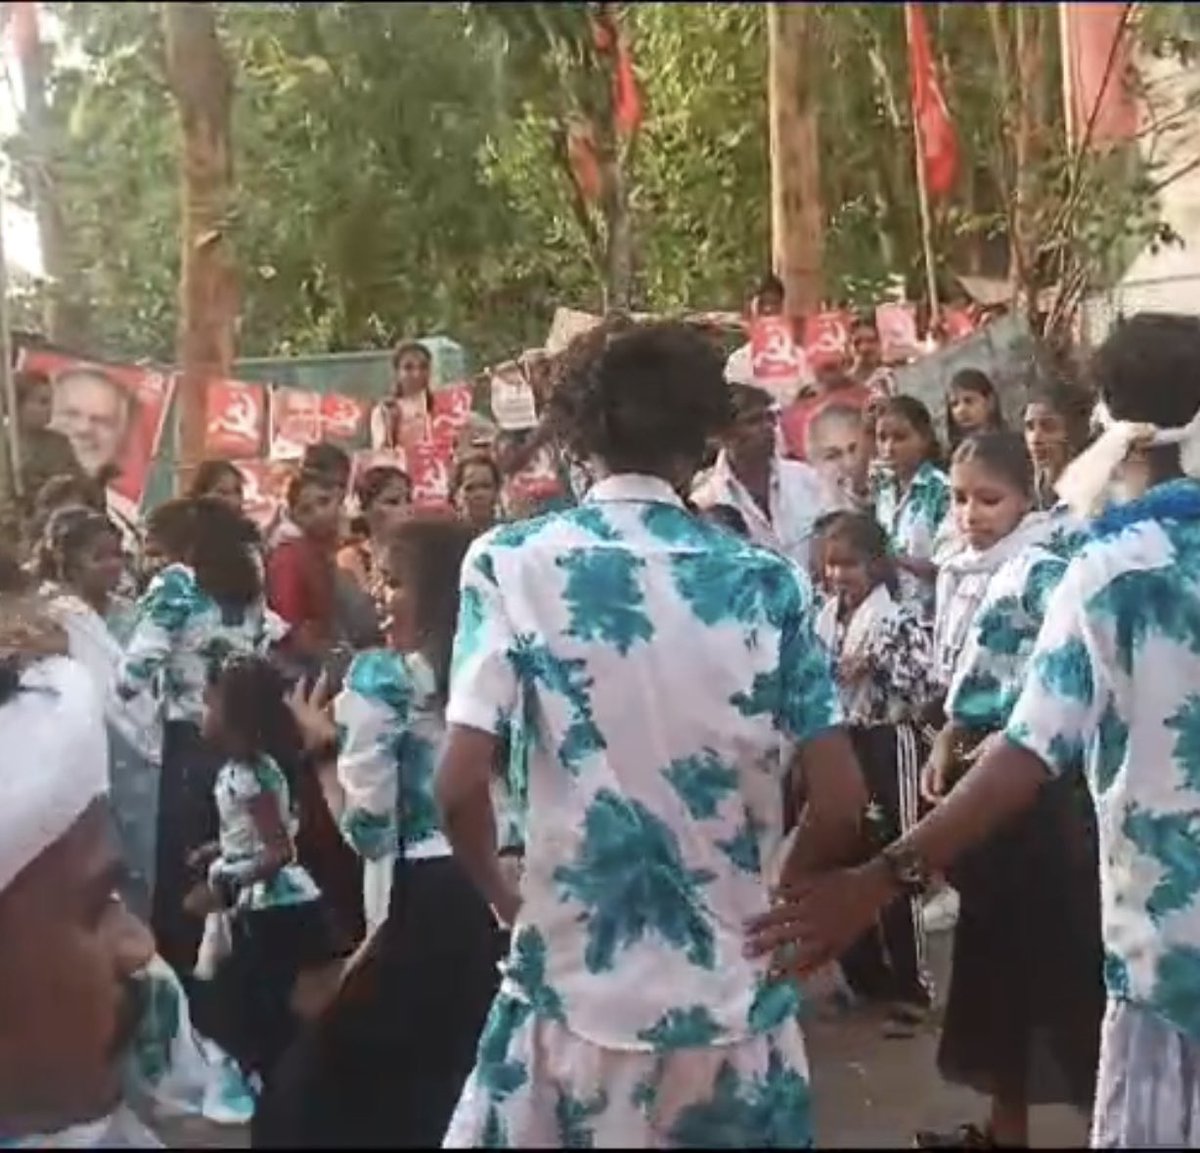 Few scenes from my village temple Vishu celebration. The fund collected as “secular” goes for crass display of communism. Look at the red flags and Nayanar photos.
Mind you saffaron is absolutely not allowed.